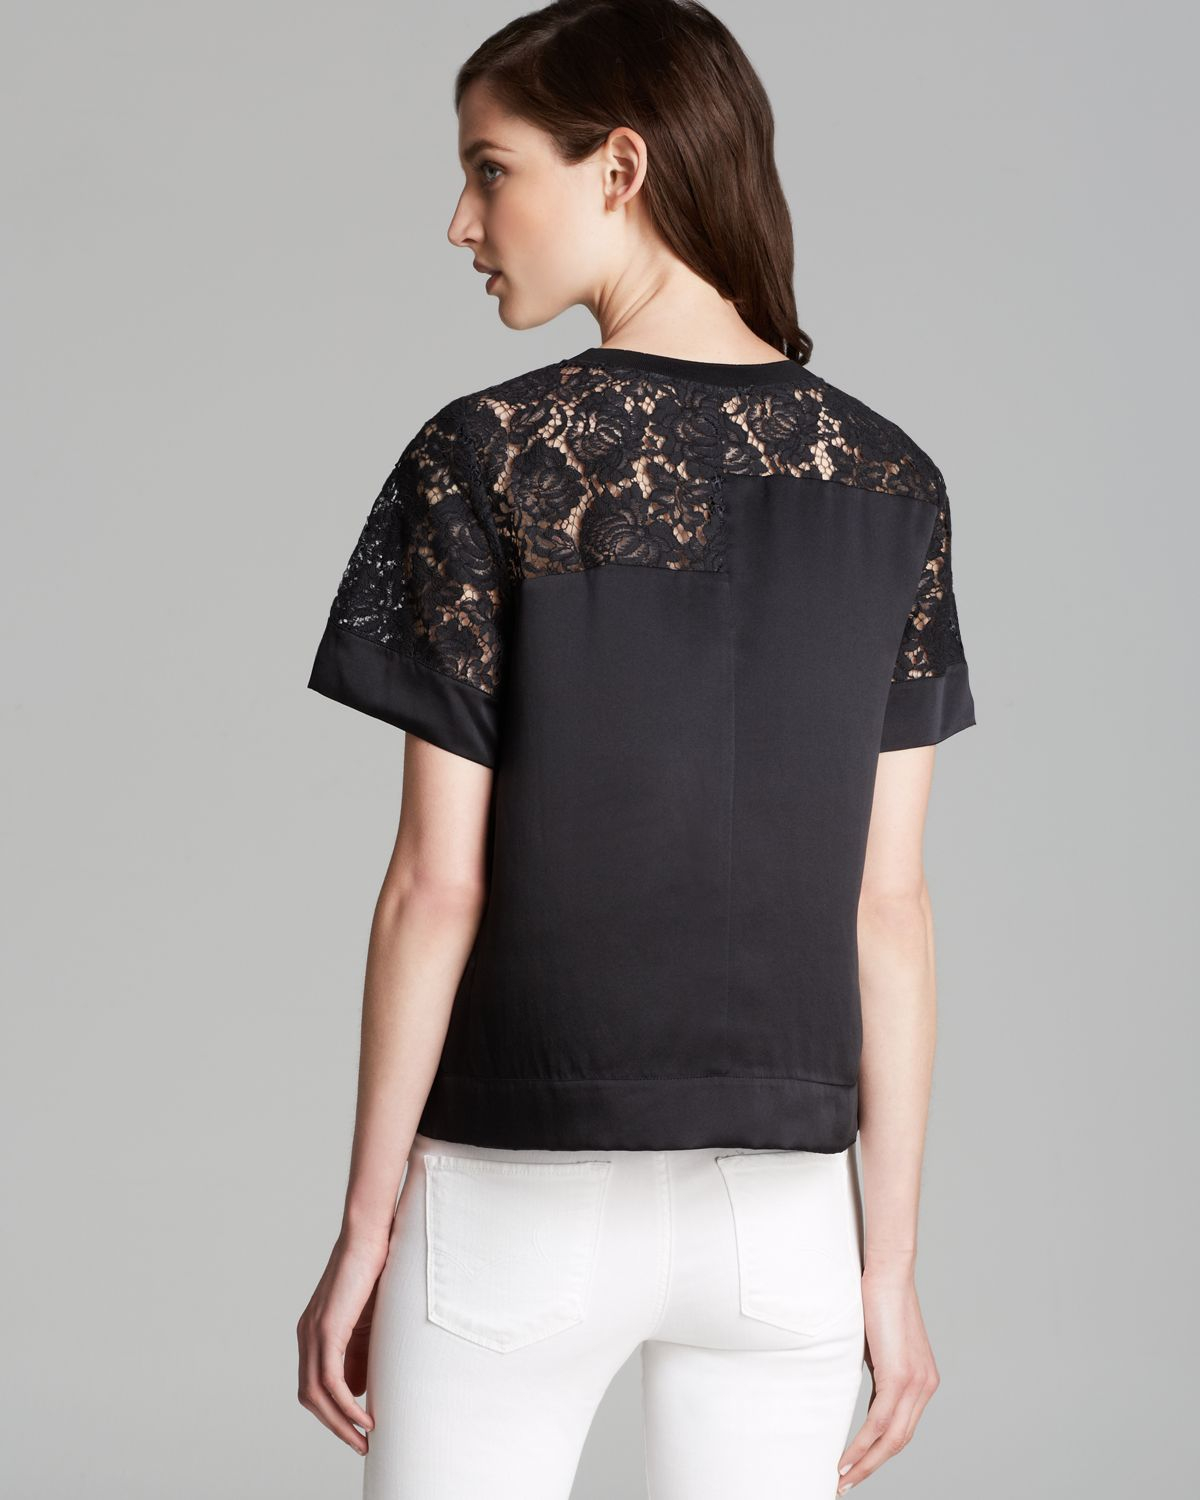 Rebecca taylor Top Short Sleeve Lace Inset in Black | Lyst